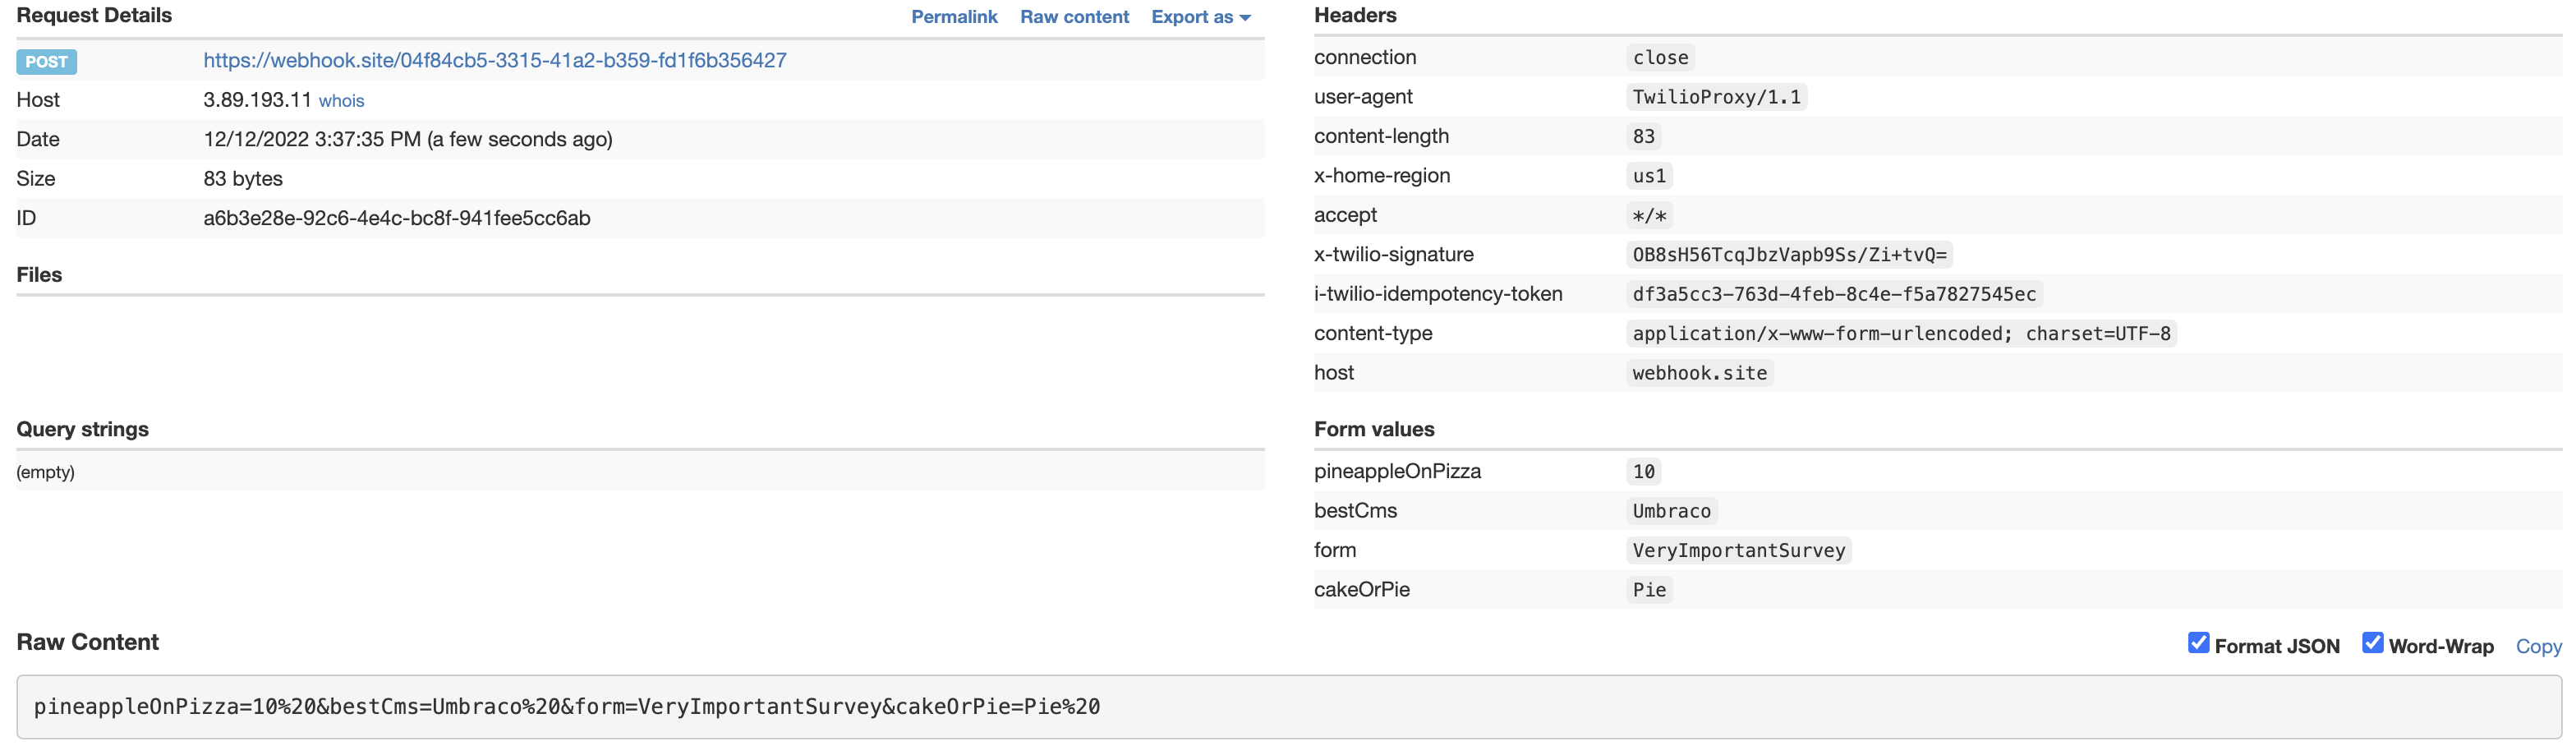 HTTP request data sent to the webhook.site URL showing headers and form encoded parameters in the request body.